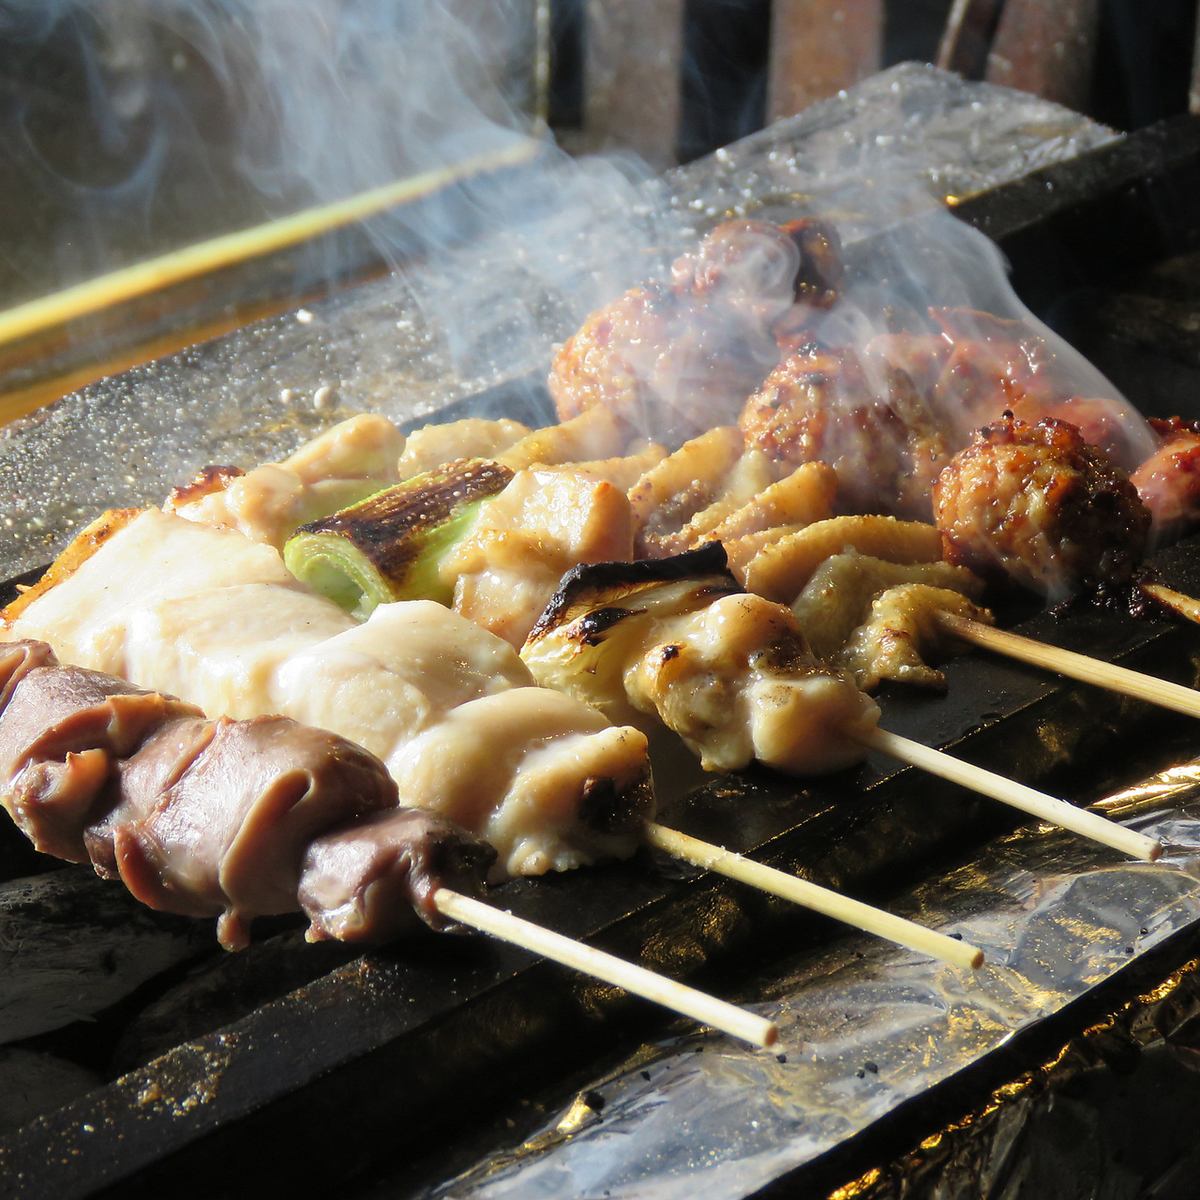 Yakitori grilled over binchotan charcoal is exquisite!